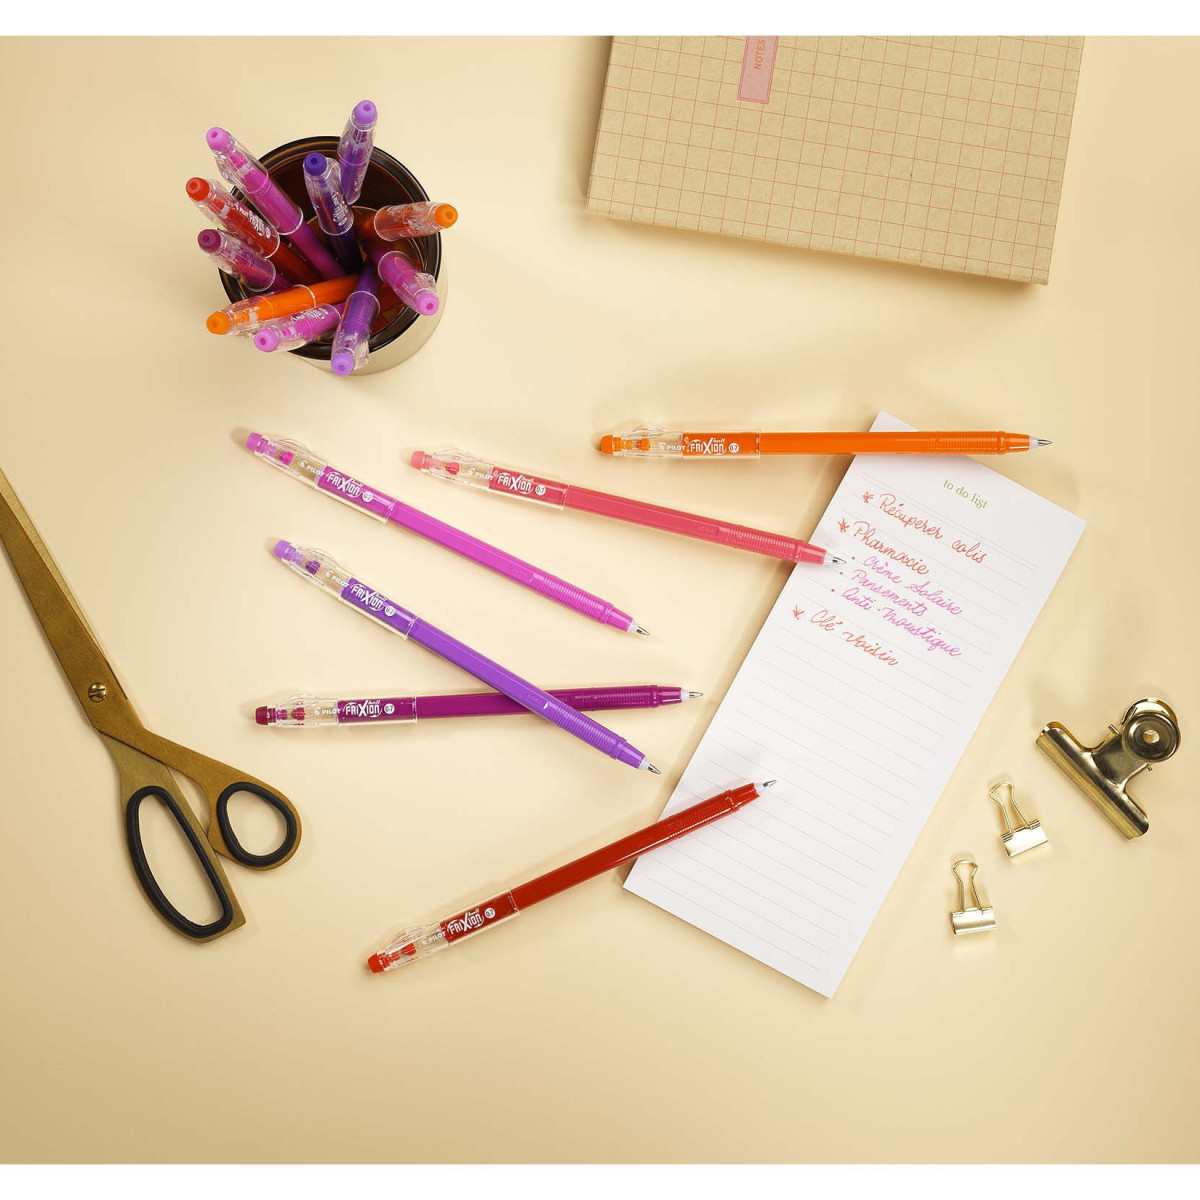  a to-do list written with colourful FriXion Stick Erasable Gel Pen, with pink, red, purple and wine red pens laying next to a scissors